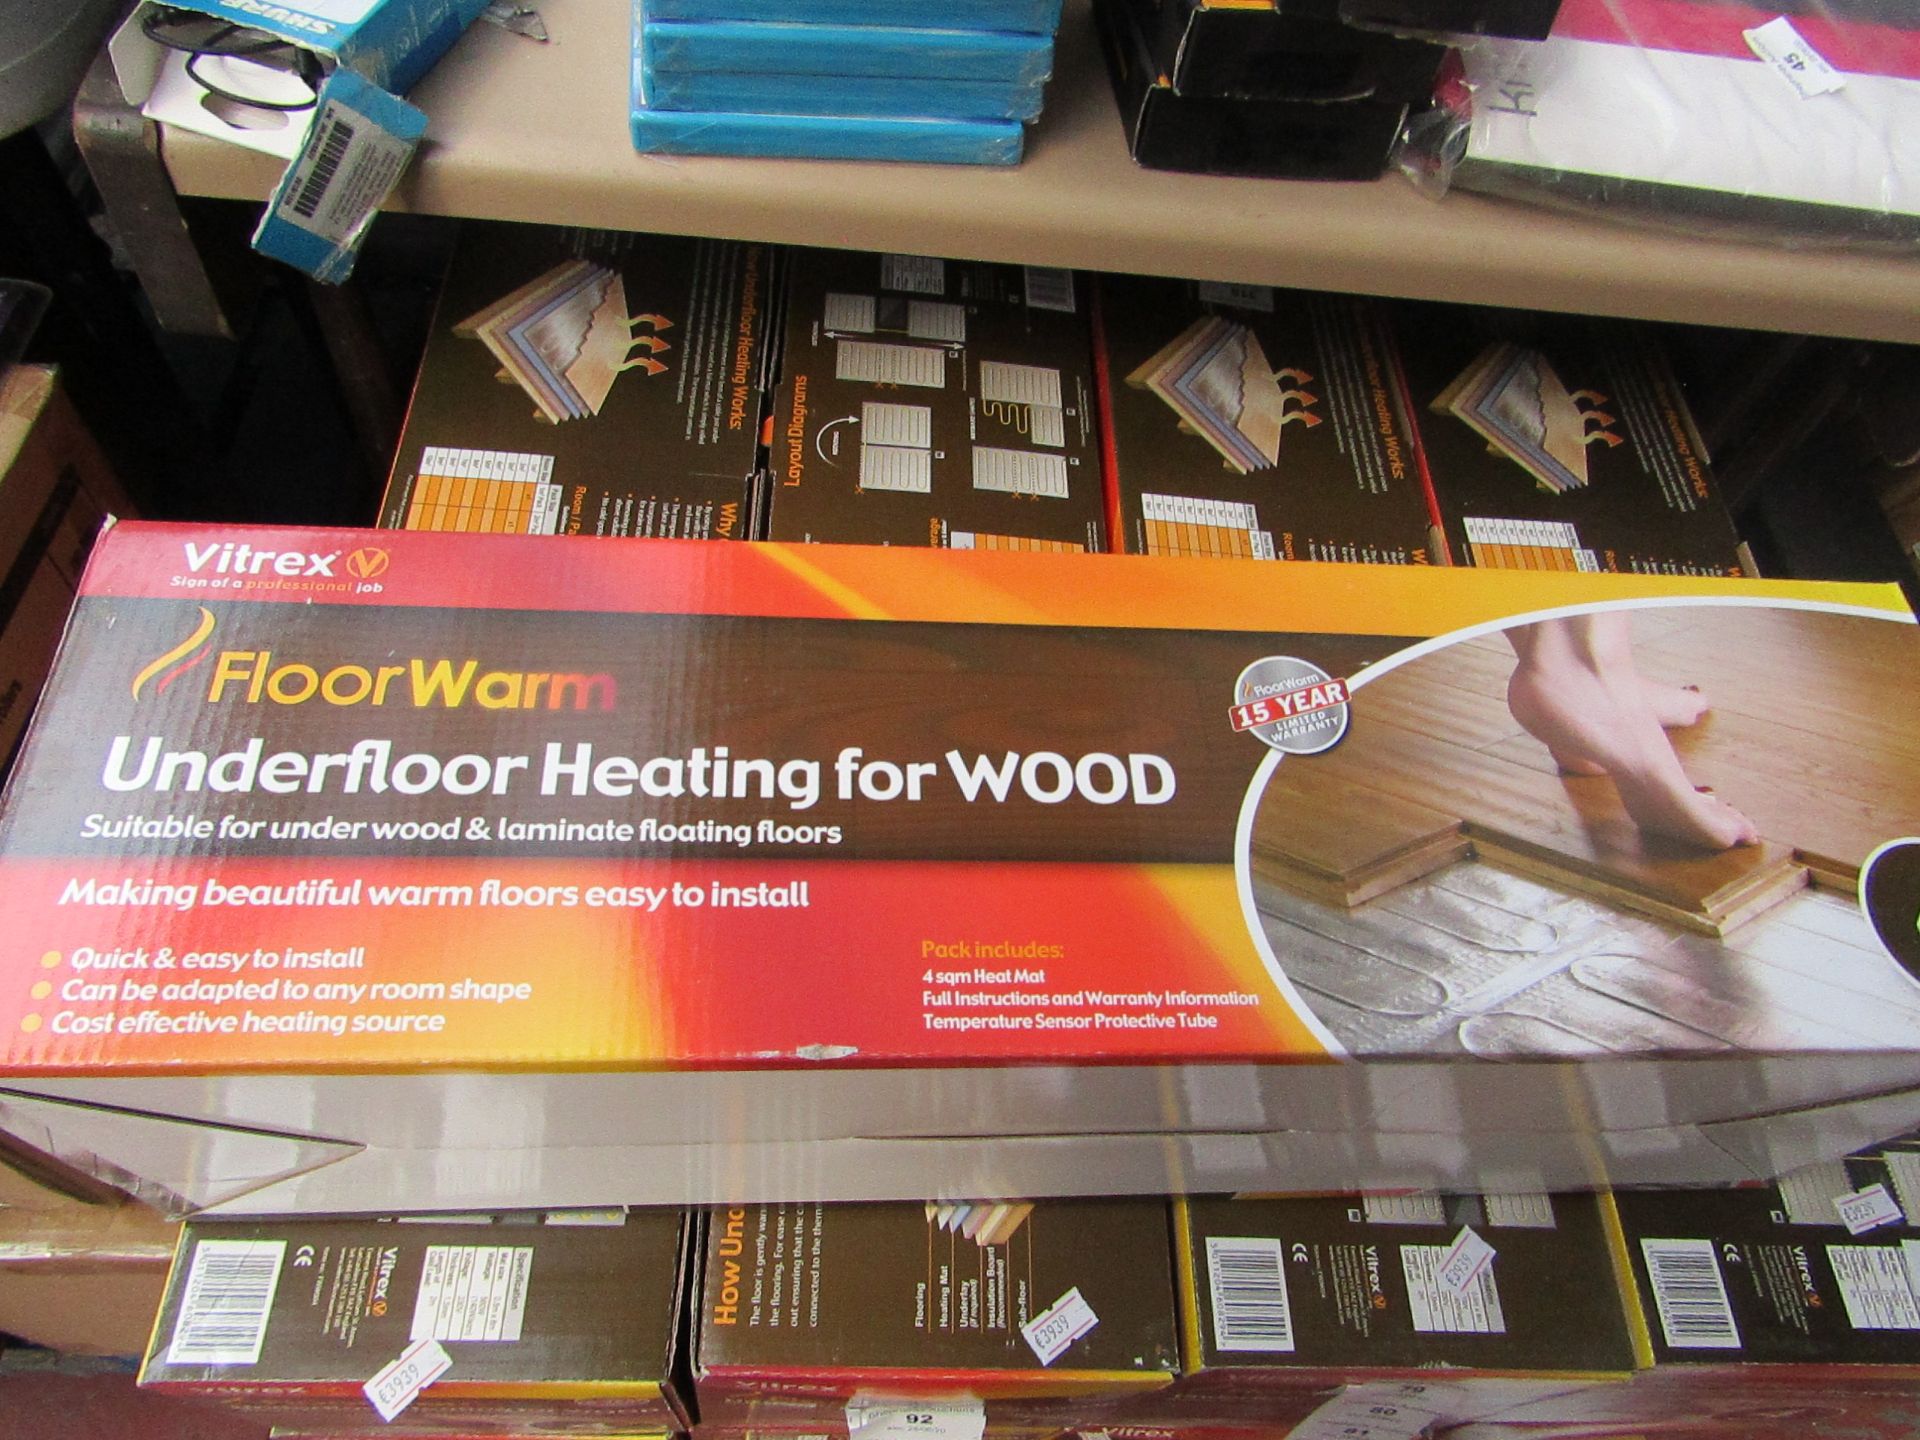 Vitrex Underfloor Heating for wood 4sq metres, new and boxed.